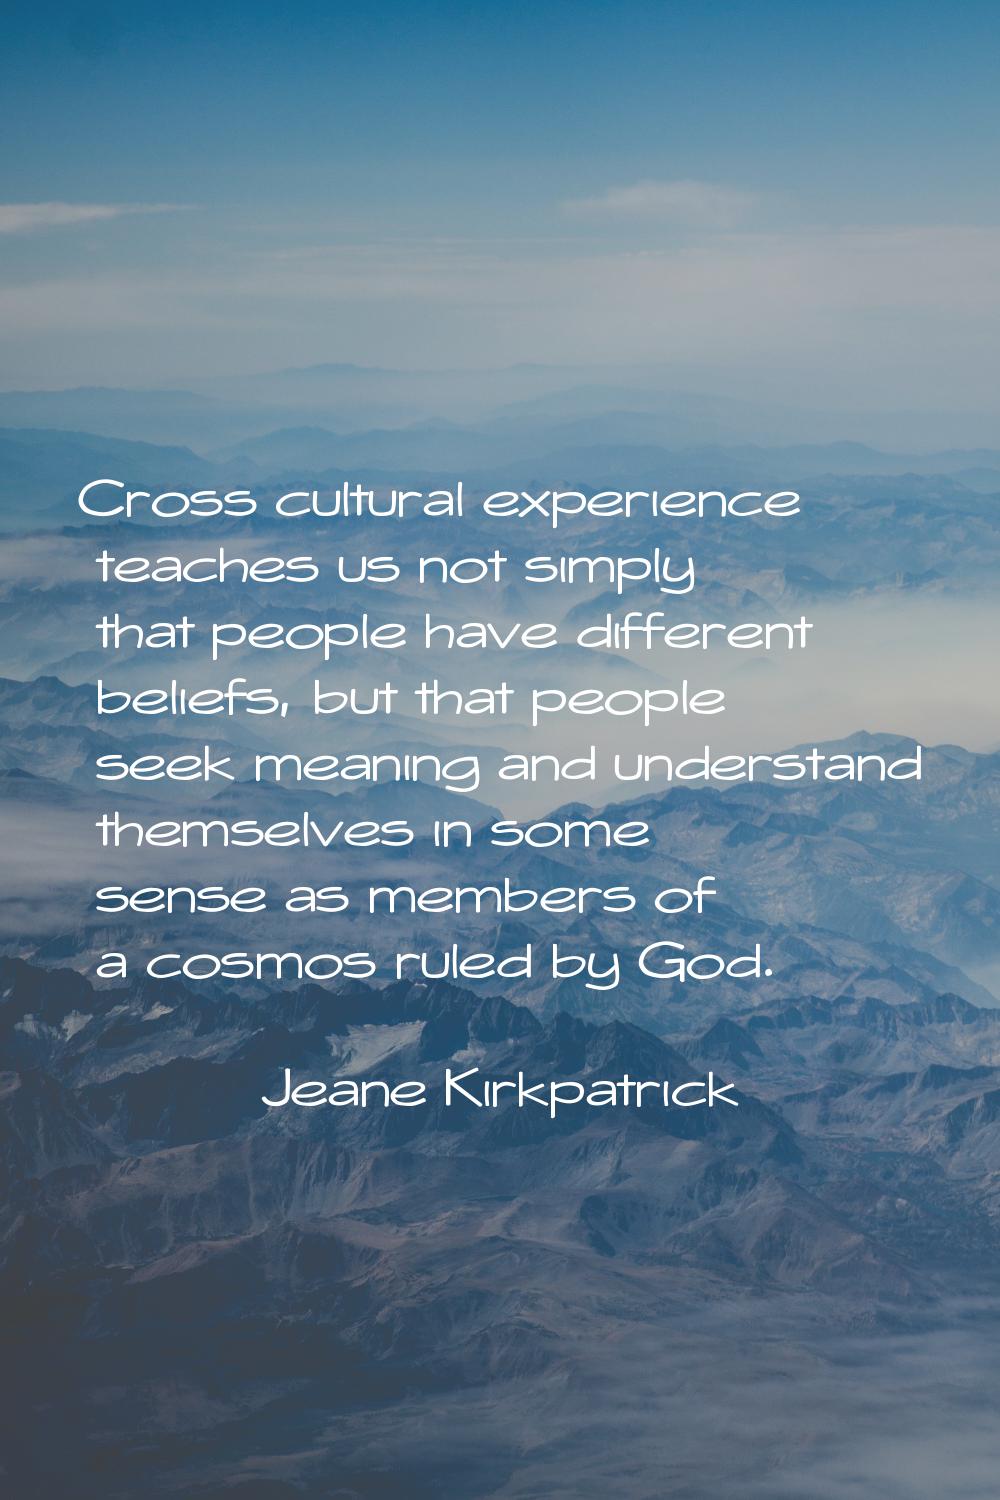 Cross cultural experience teaches us not simply that people have different beliefs, but that people